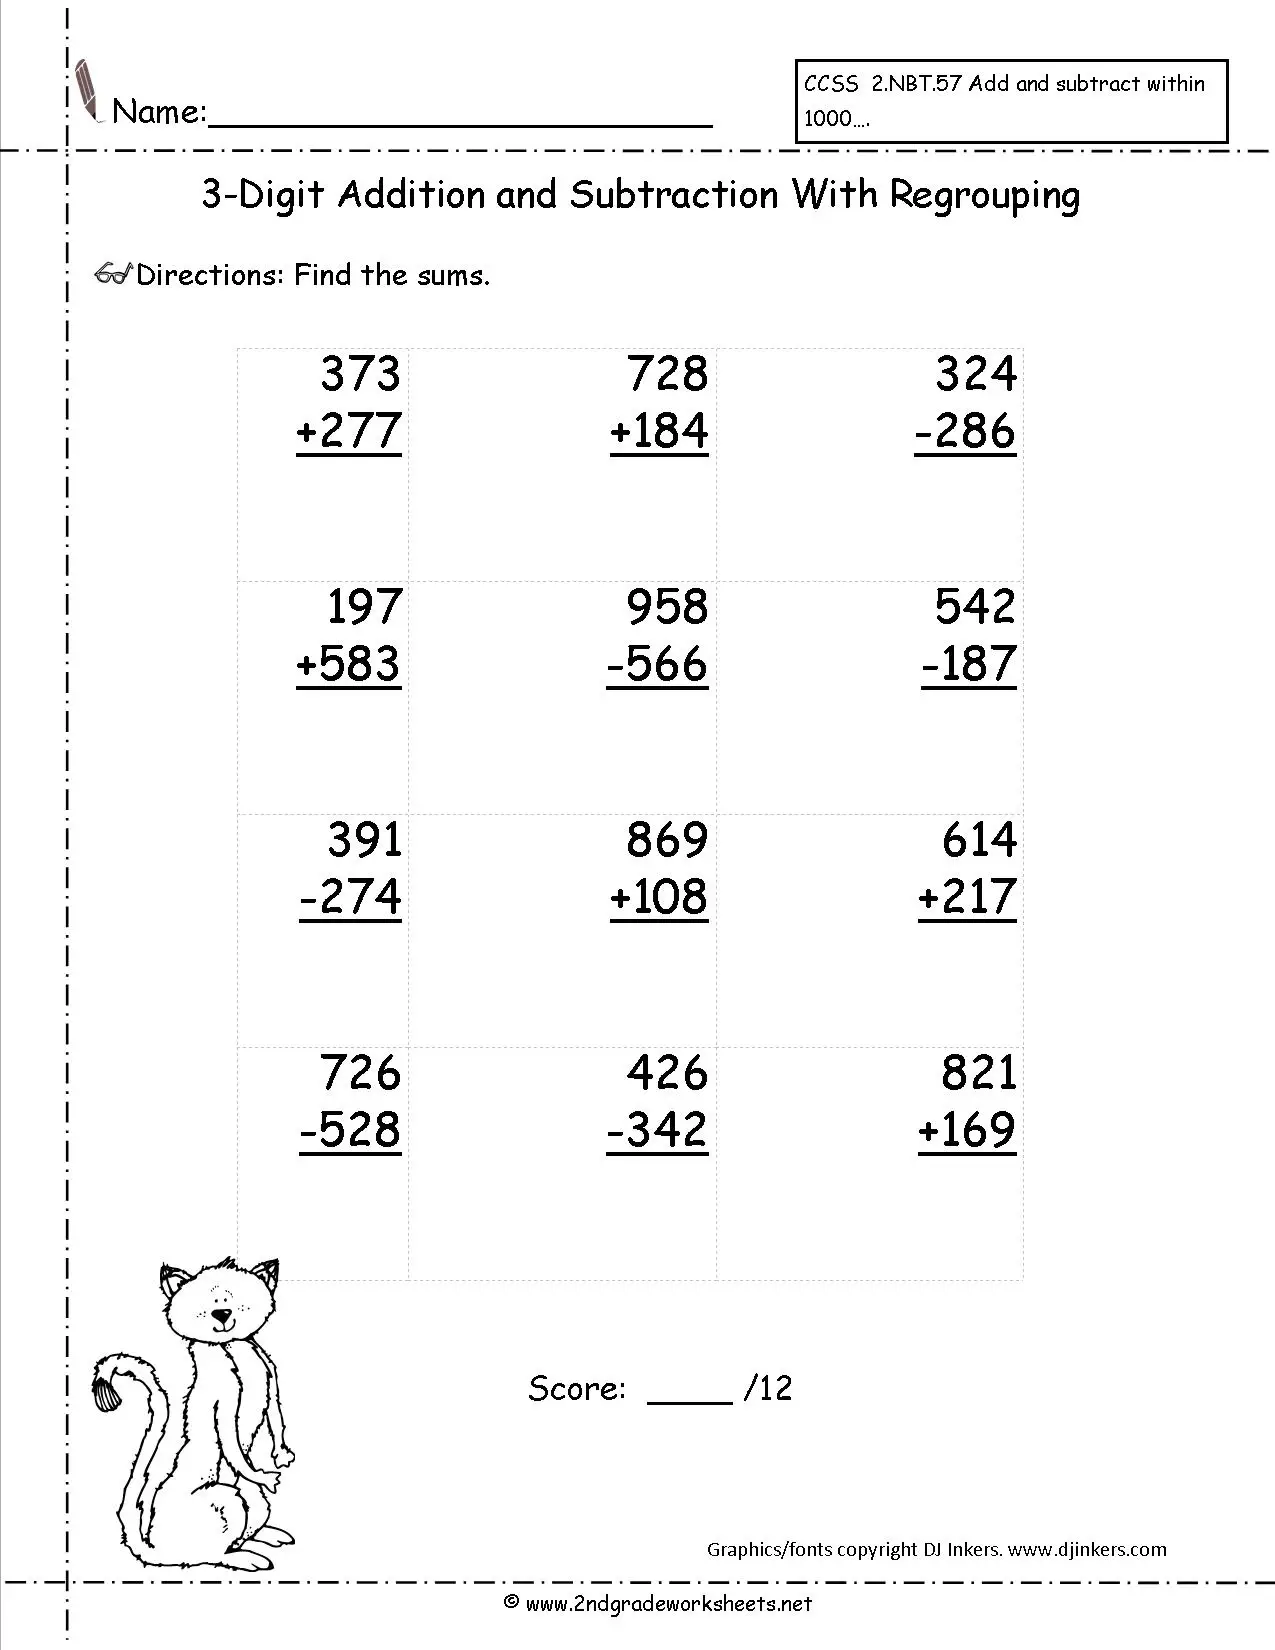 4-digit-regrouping-subtraction-math-subtraction-math-worksheets